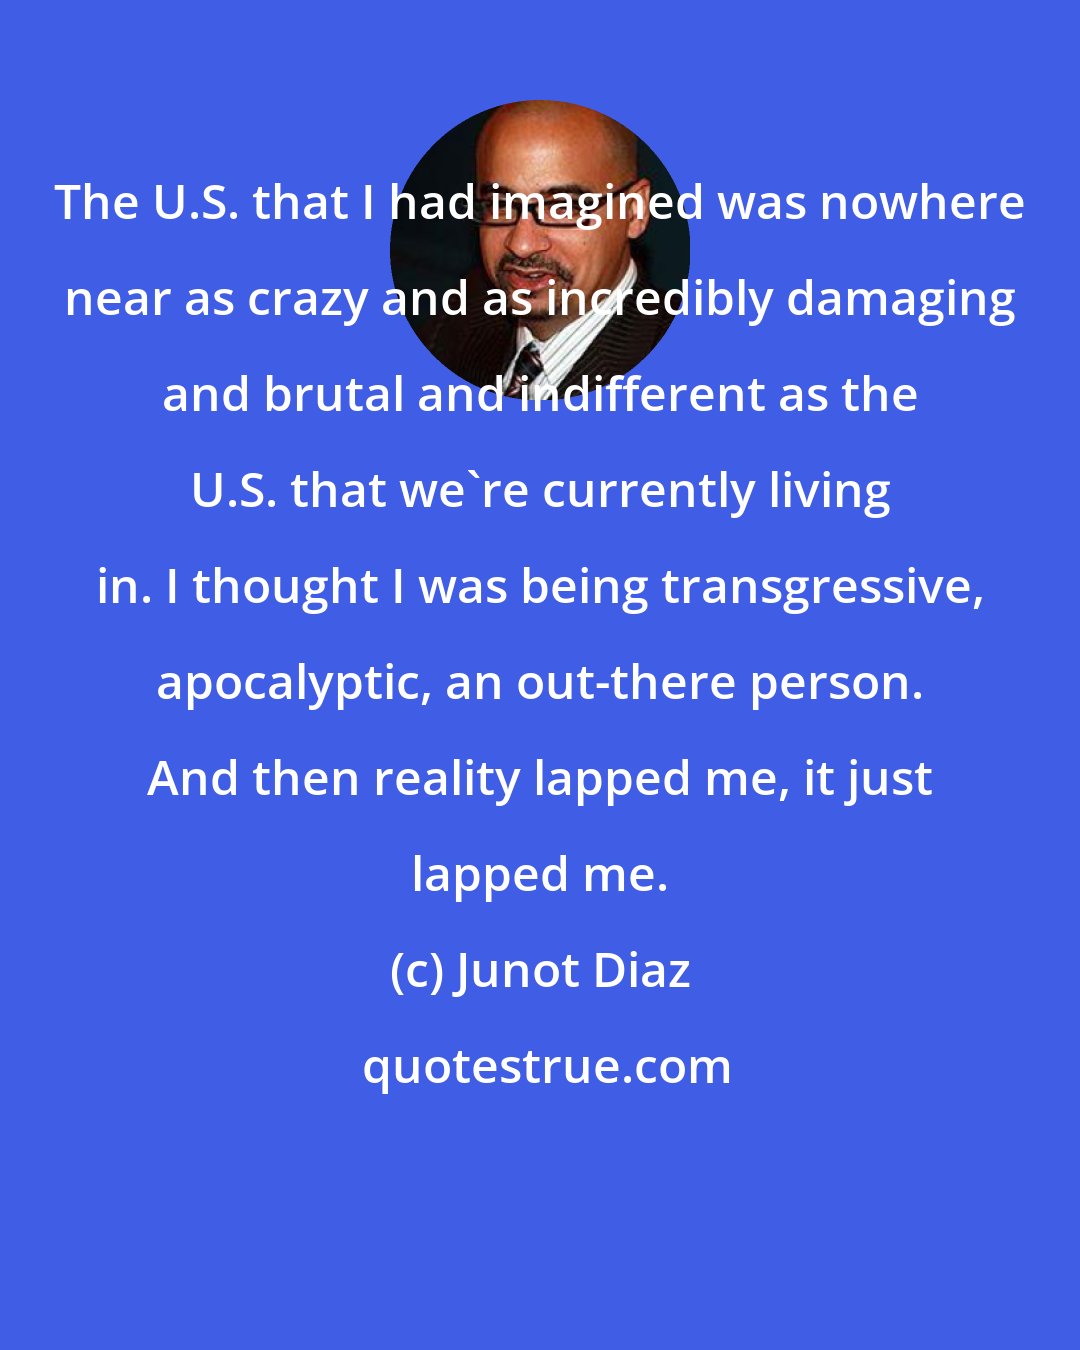 Junot Diaz: The U.S. that I had imagined was nowhere near as crazy and as incredibly damaging and brutal and indifferent as the U.S. that we're currently living in. I thought I was being transgressive, apocalyptic, an out-there person. And then reality lapped me, it just lapped me.